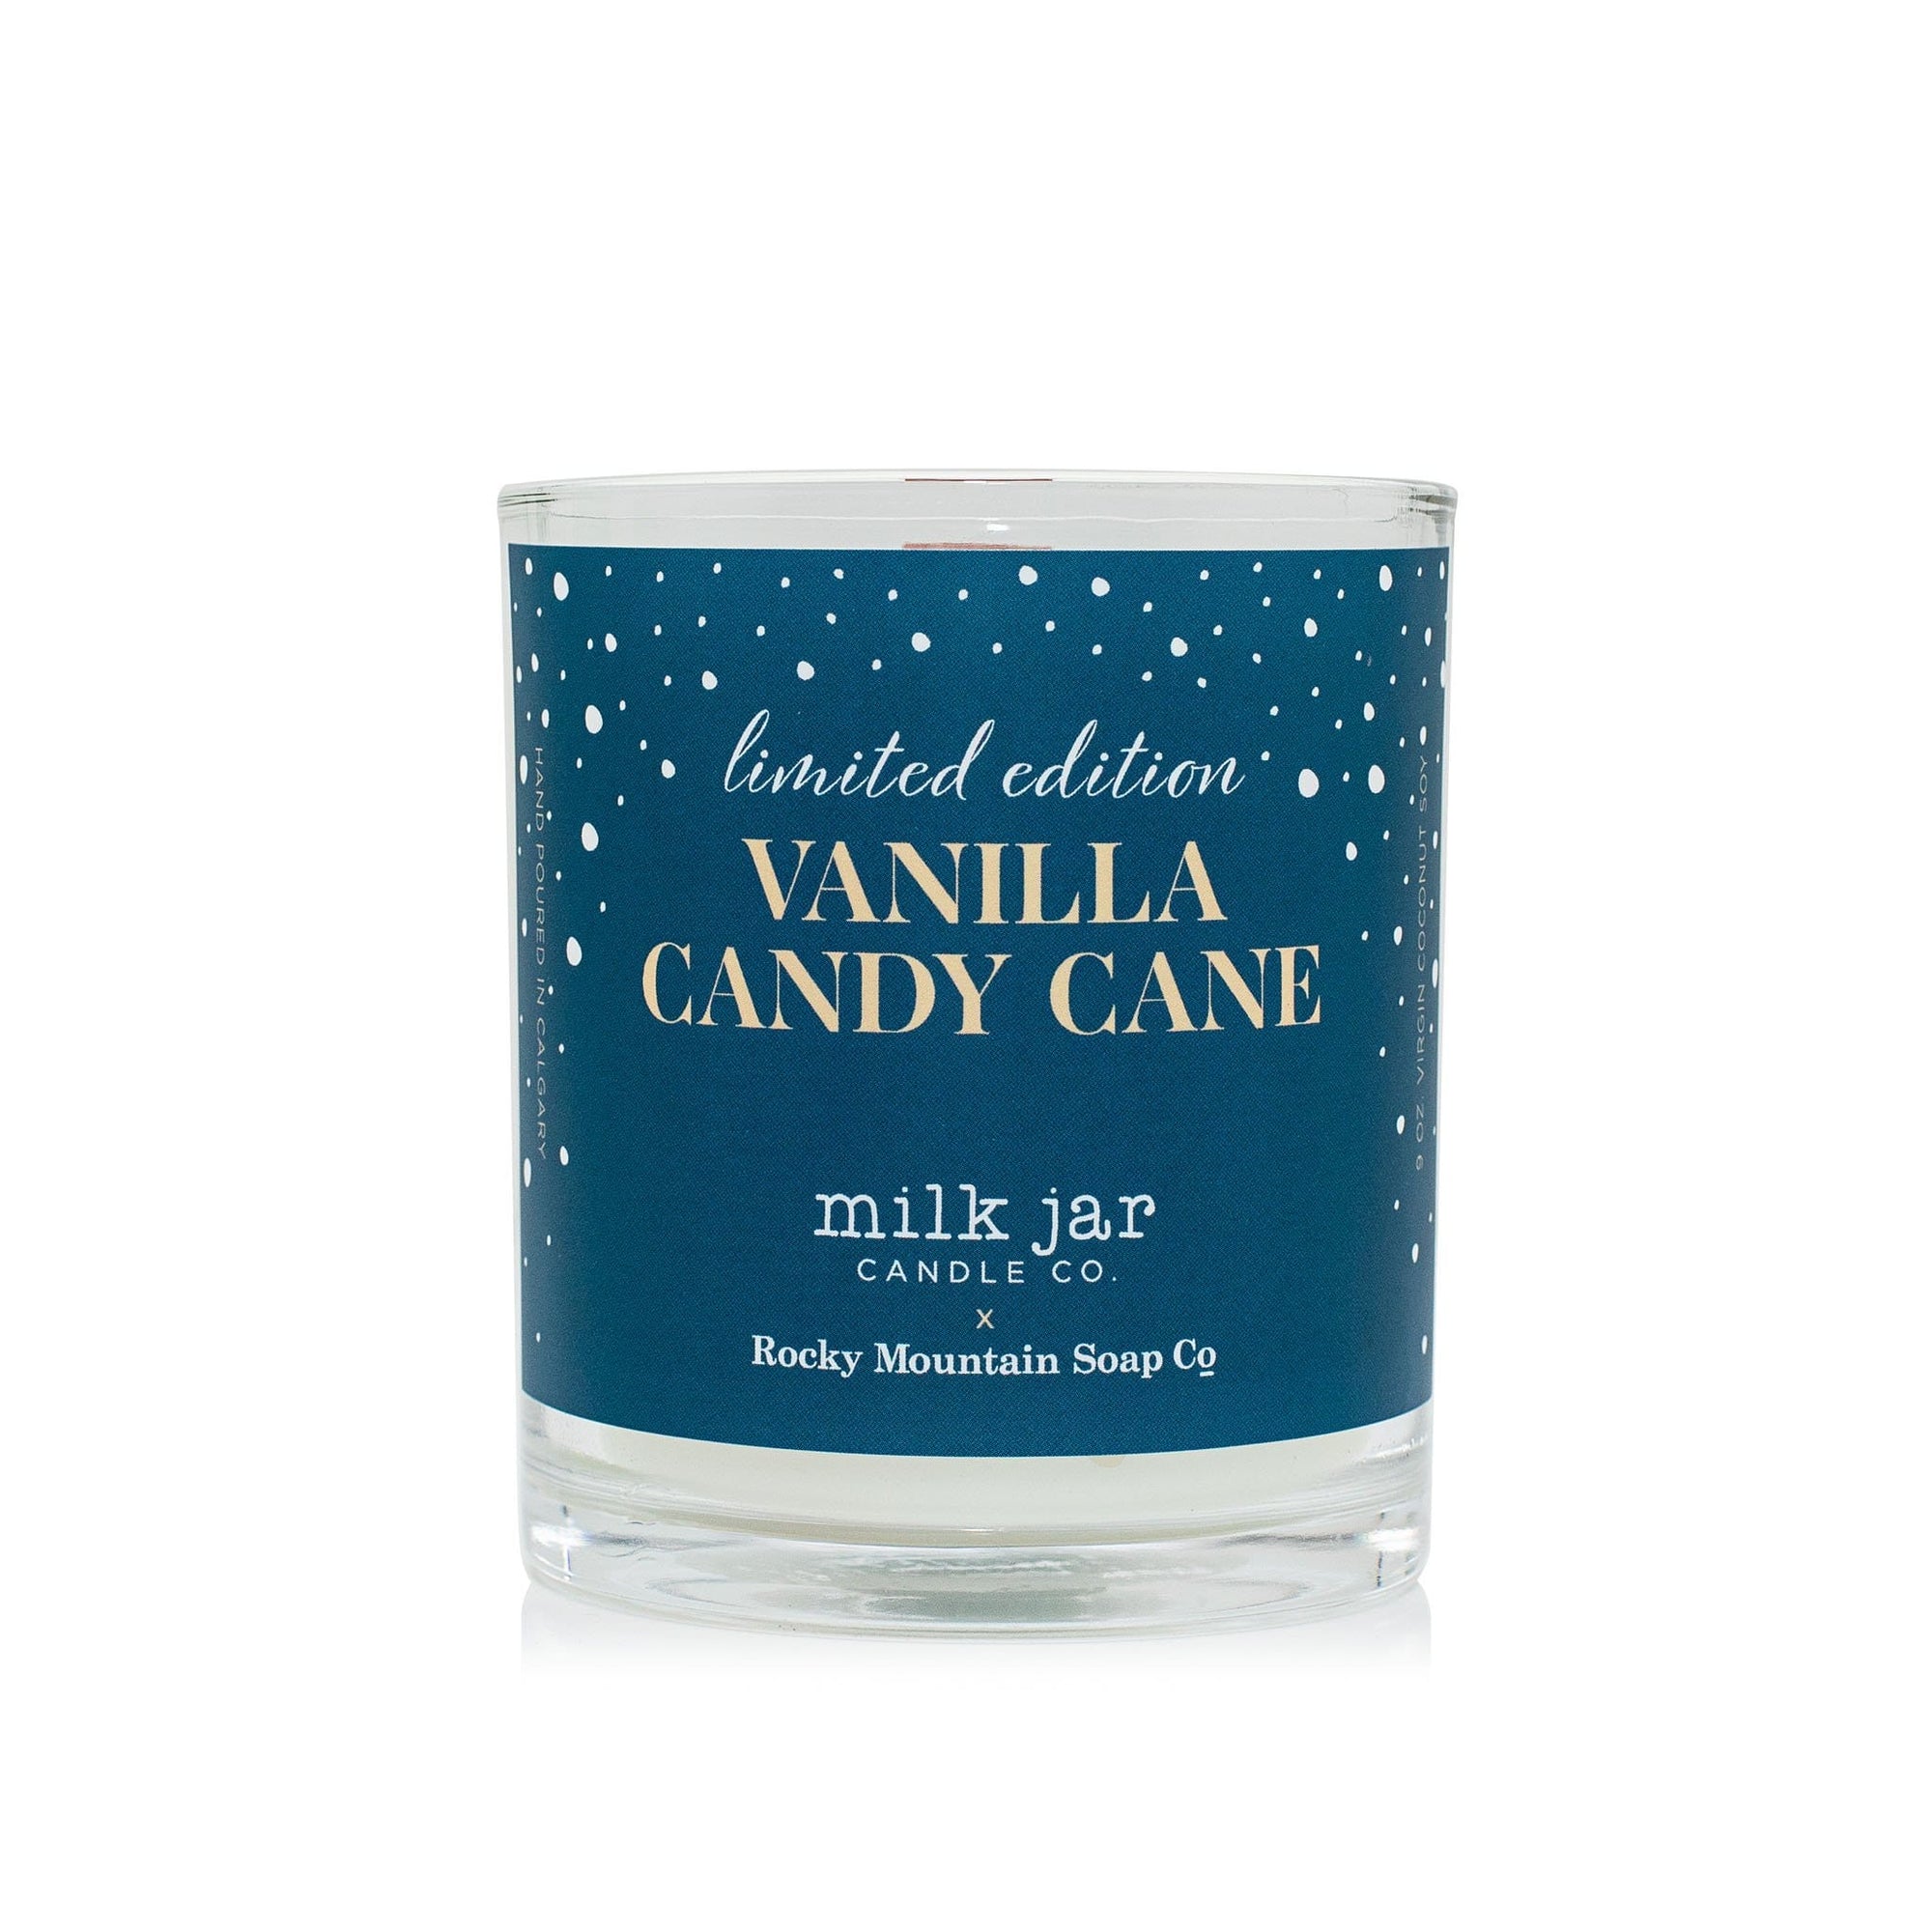 Vanilla Candy Cane Candle